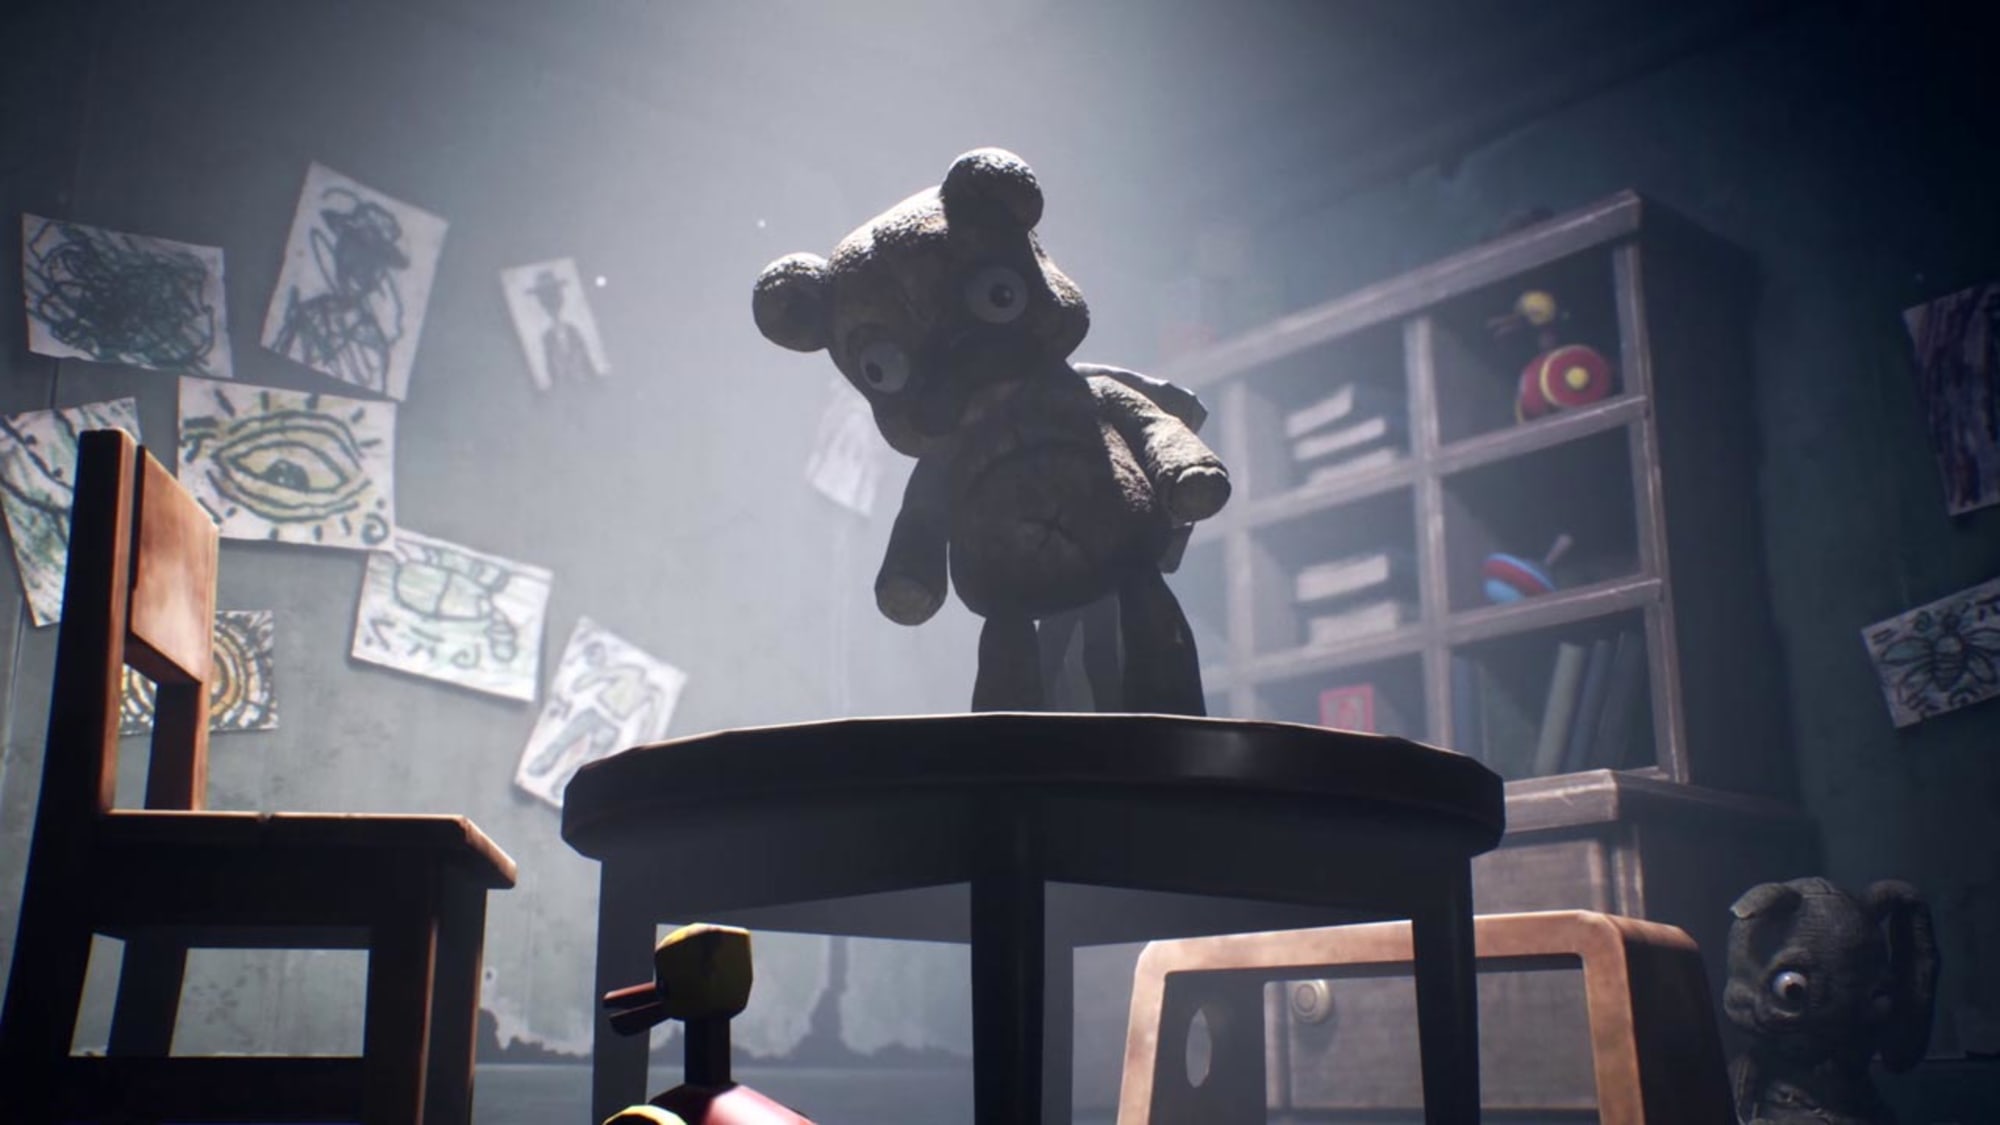 Little Nightmares mobile - Reveal Date trailer 